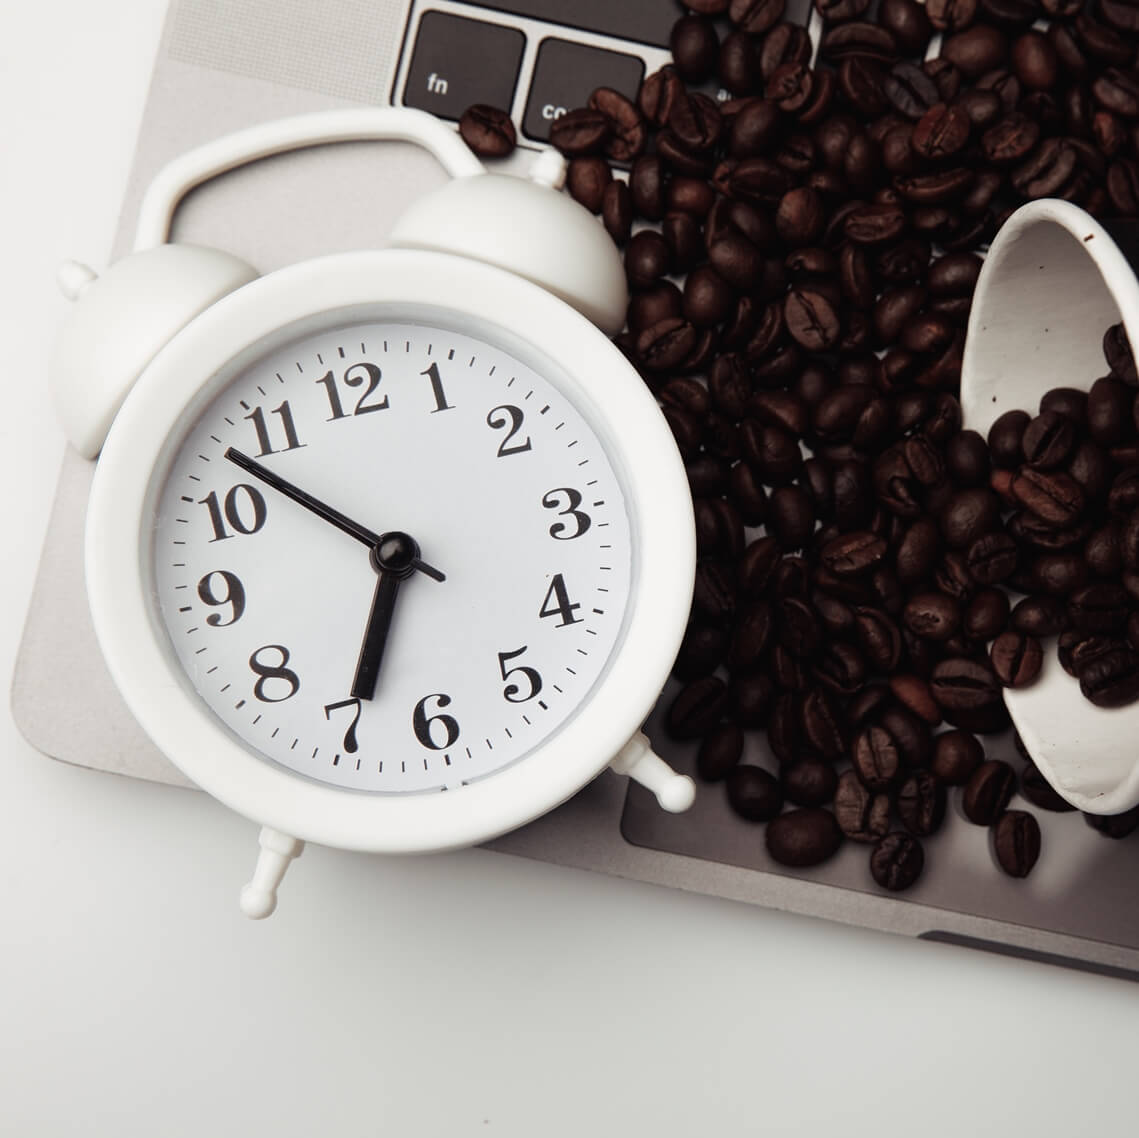 a clock and coffee beans on an opened laptop